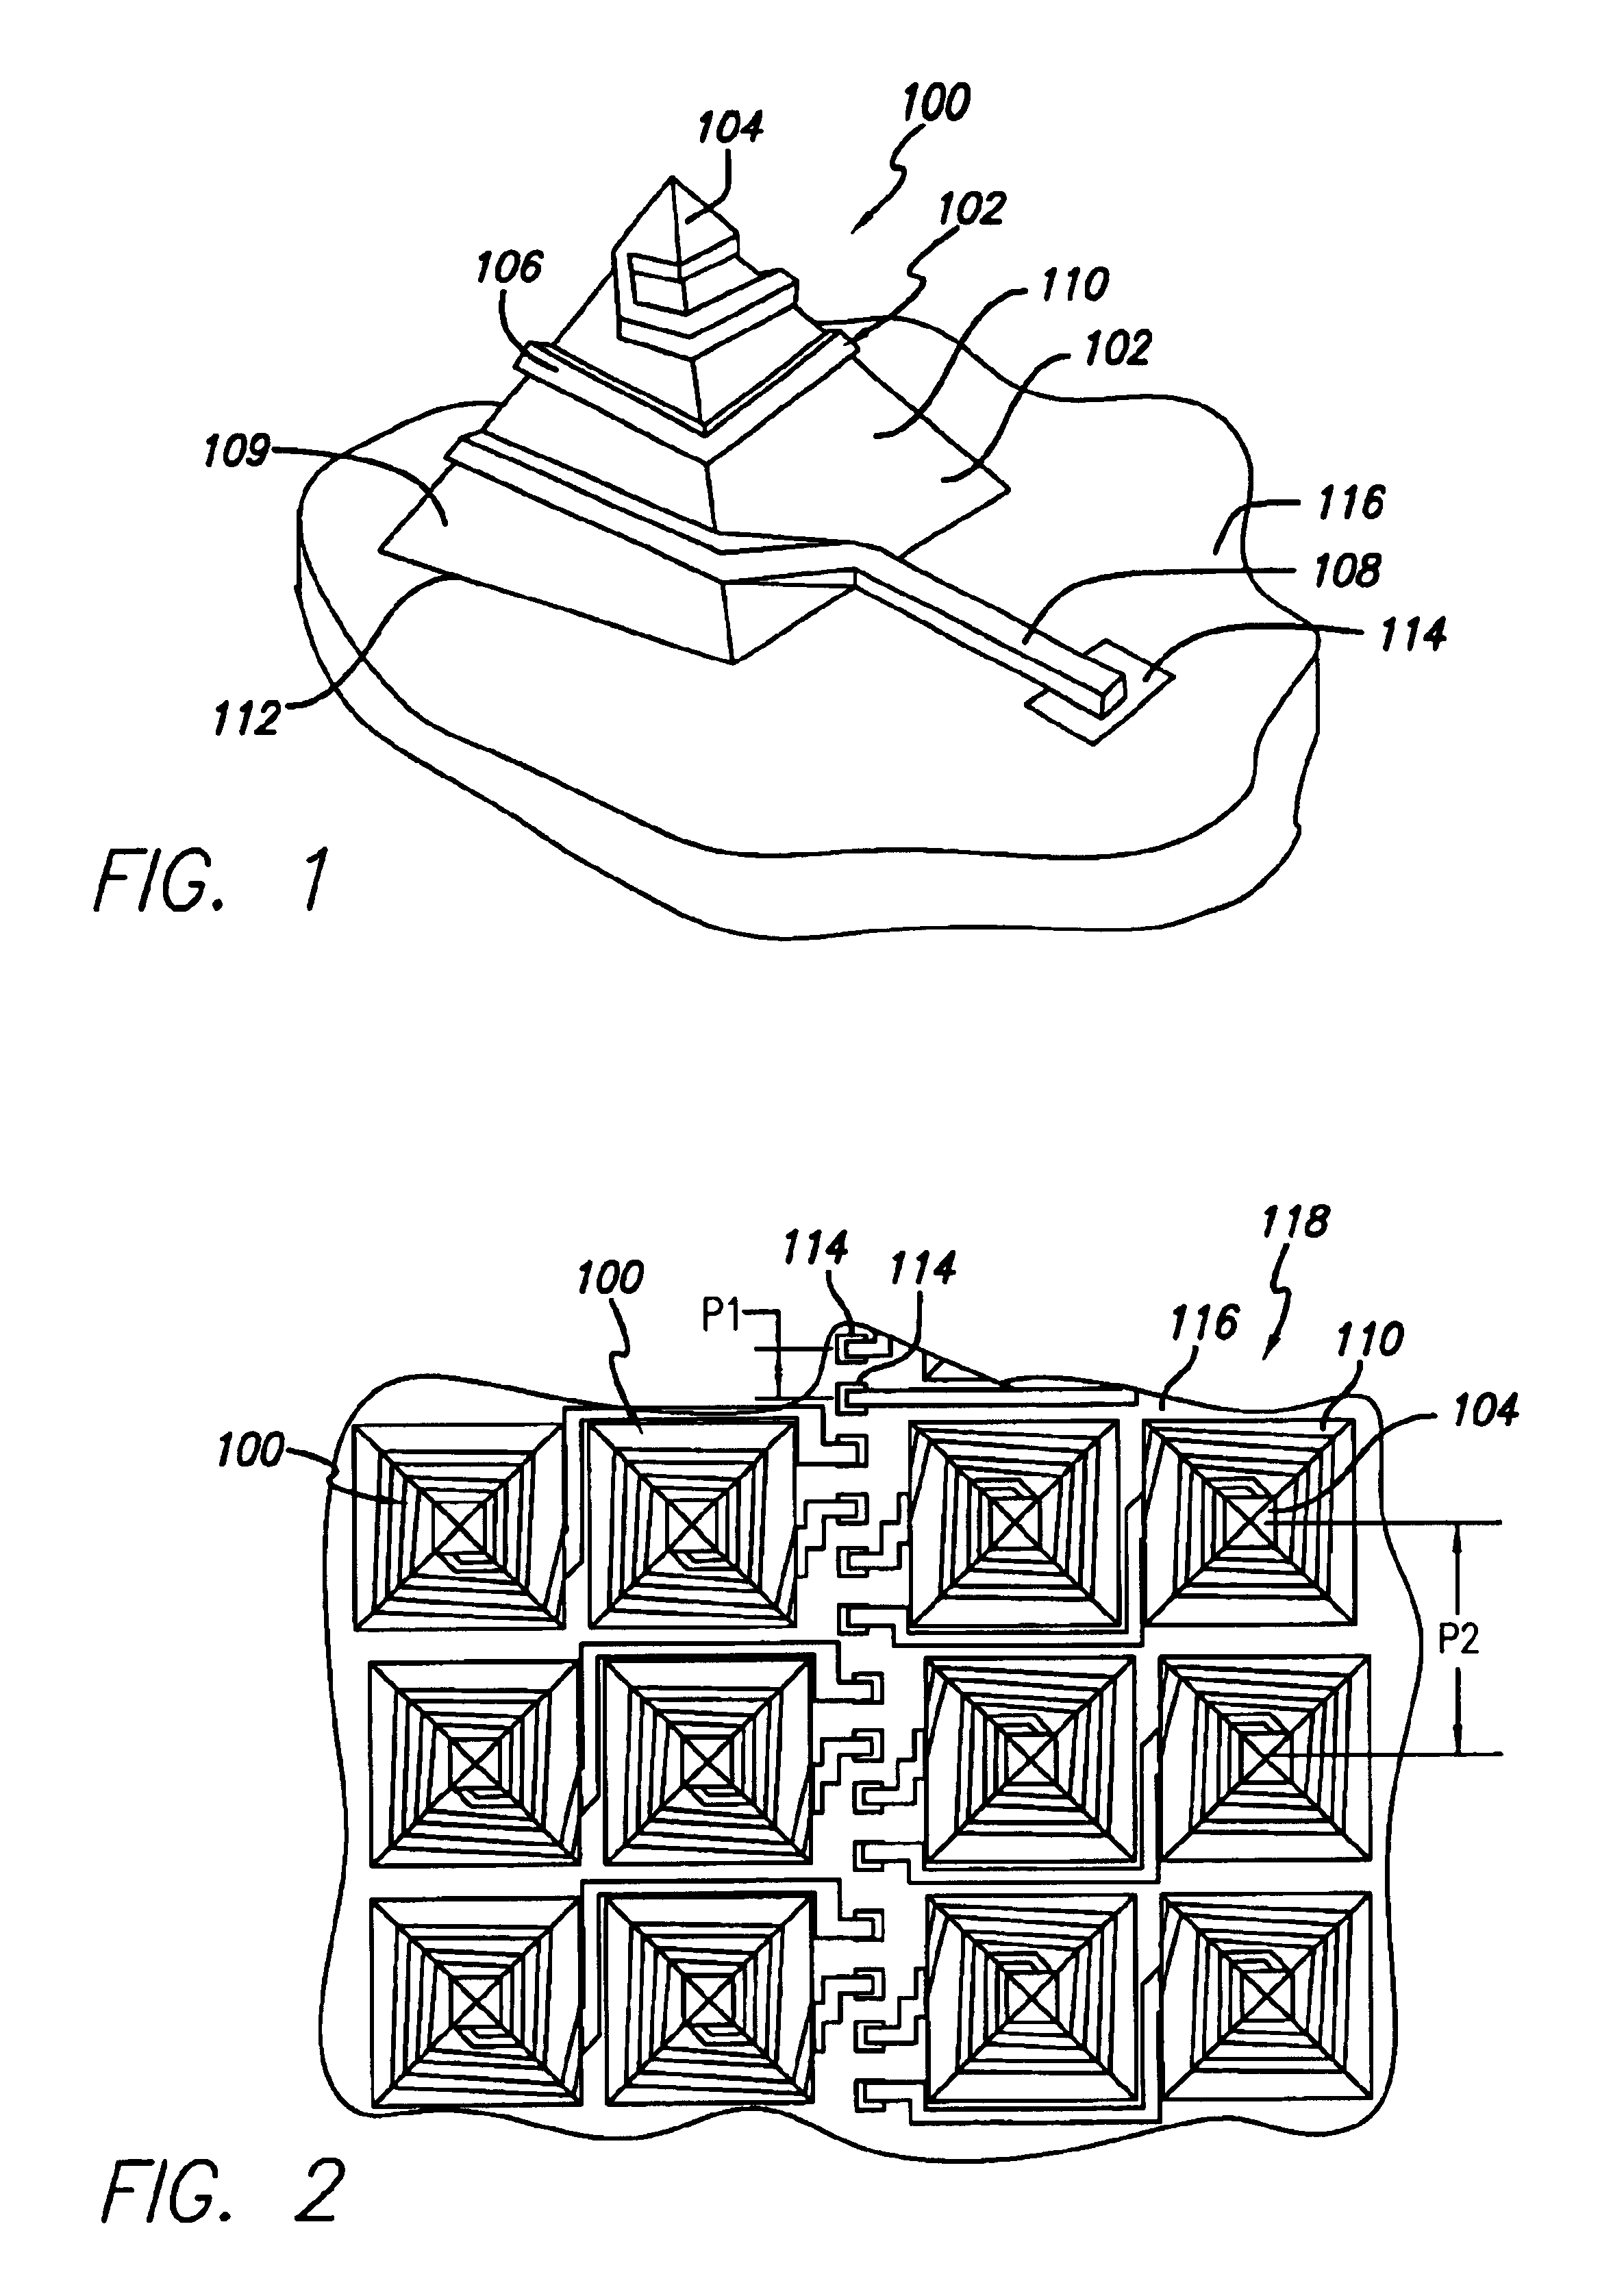 Helical microelectronic contact and method for fabricating same